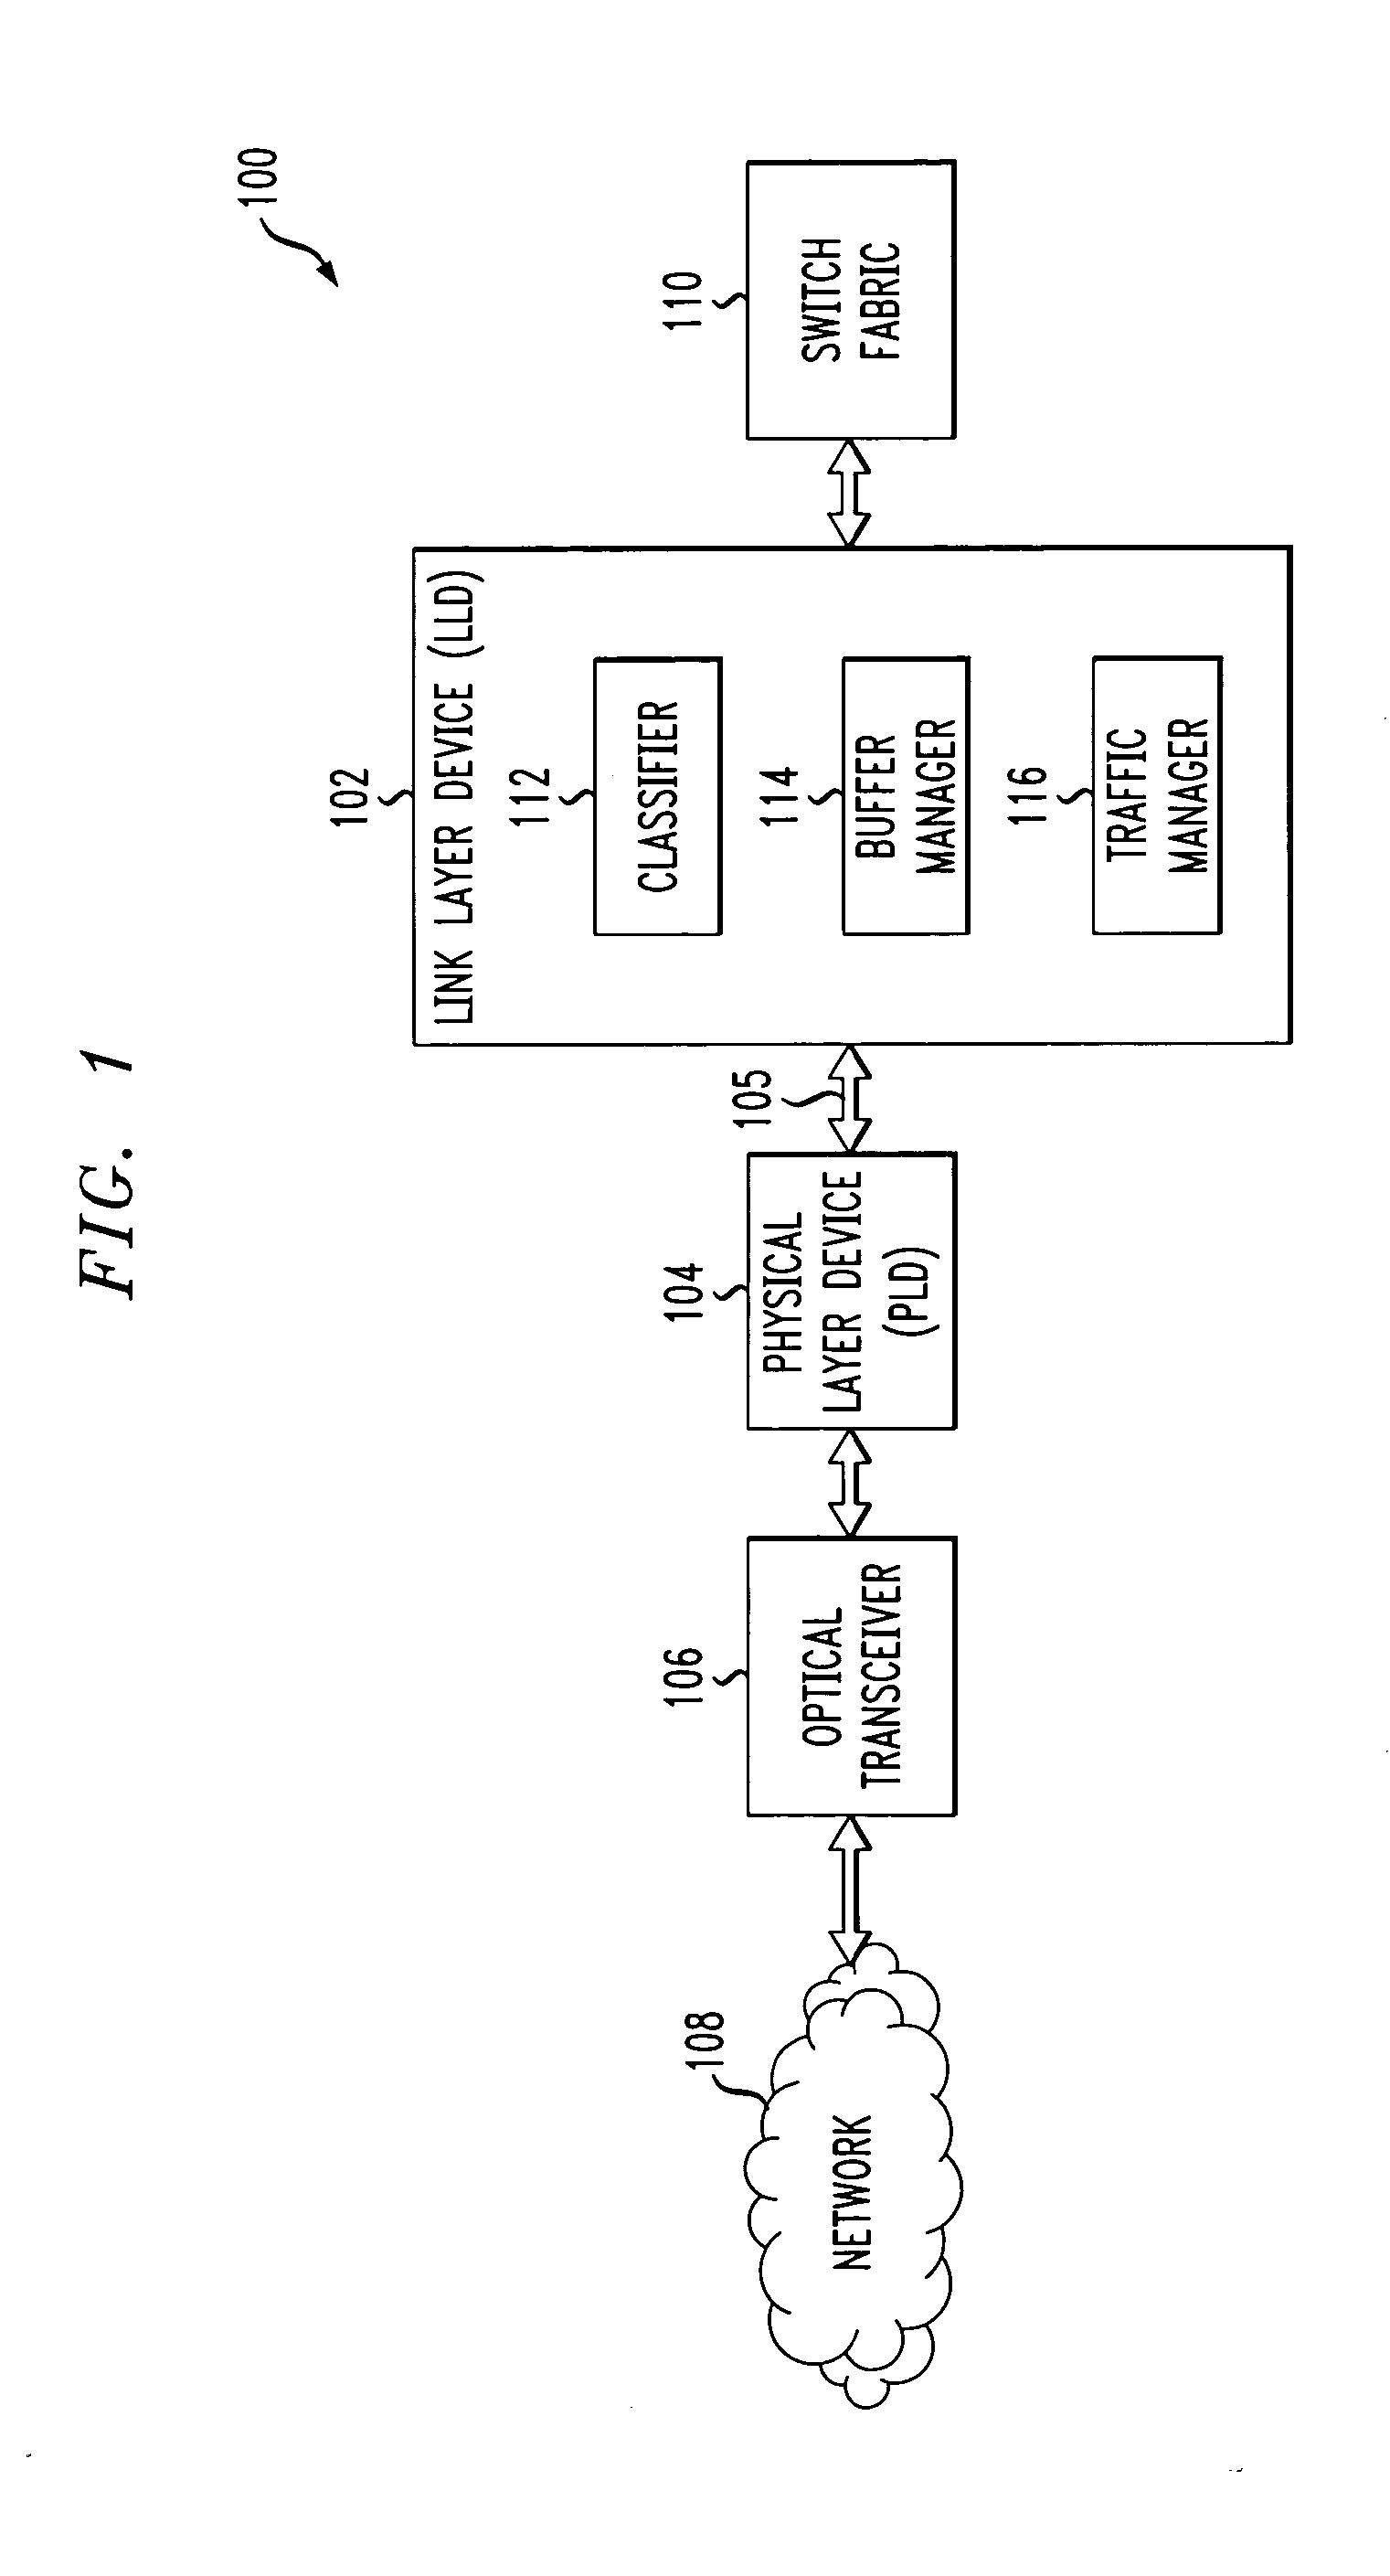 Traffic management using in-band flow control and multiple-rate traffic shaping